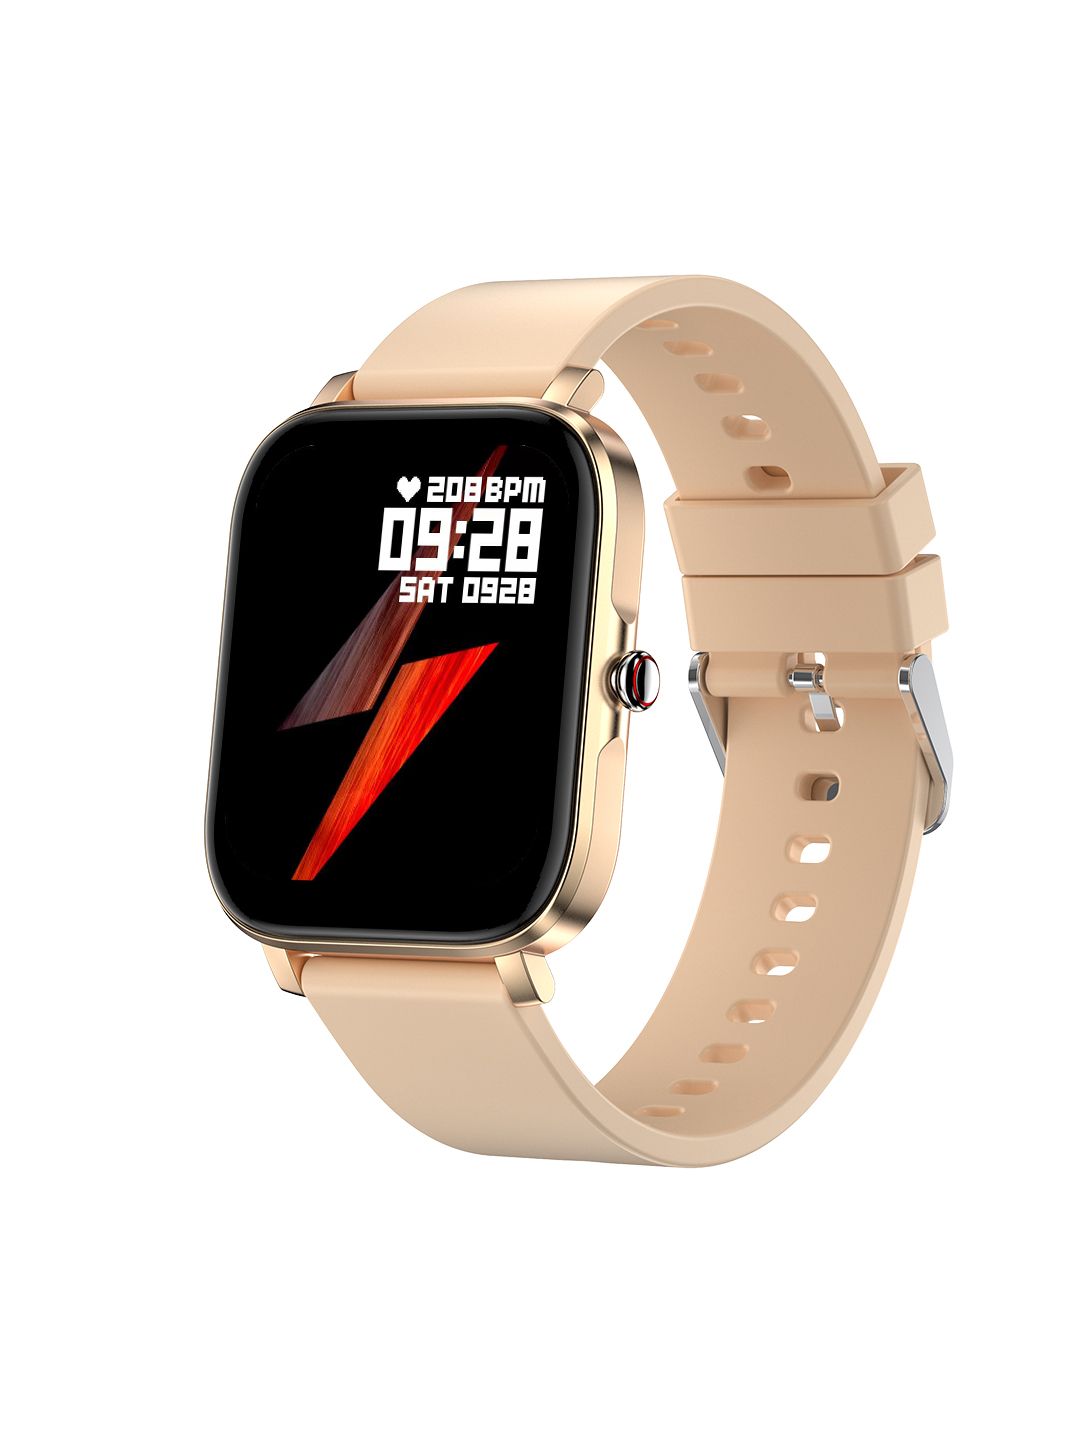 Fire-Boltt Ninja 2 Plus 1.69 Ultra-Thin 9.5mm with SpO2 Smartwatch Price in India